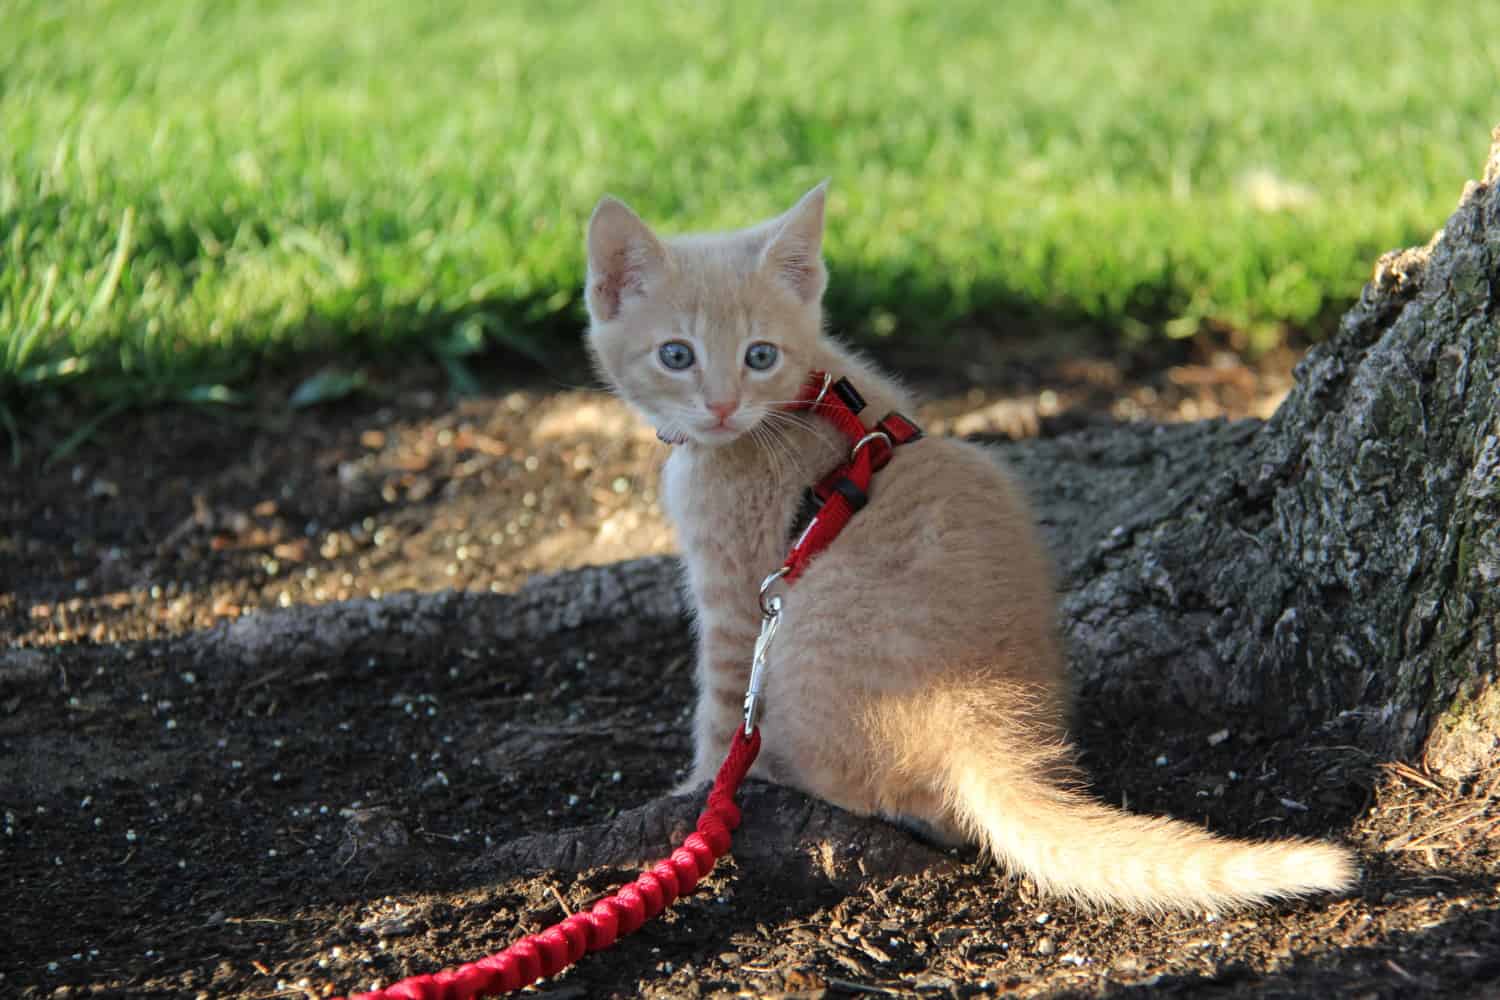 Fish the orange kitten at the foot of a tree in his red cat harness